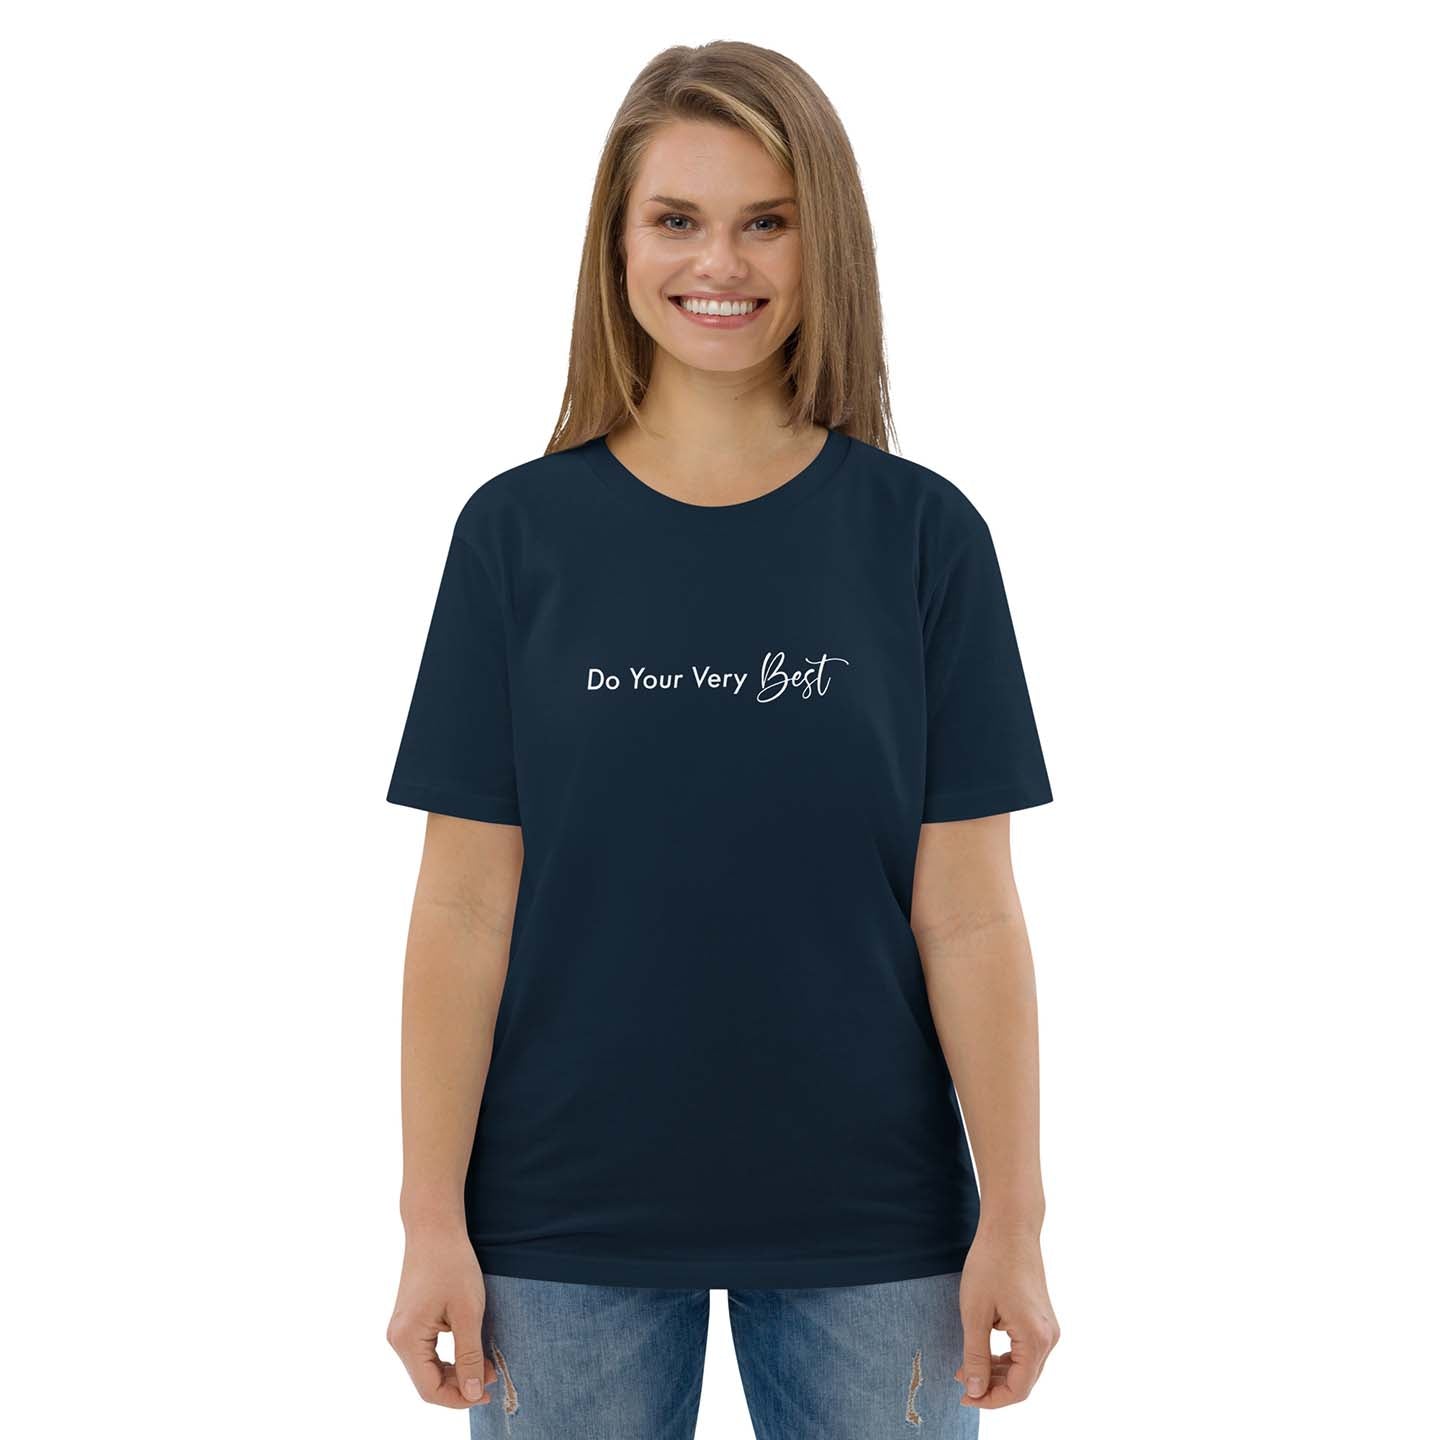 Women navy inspirational t-shirt with motivational quote, "Do Your Very Best."